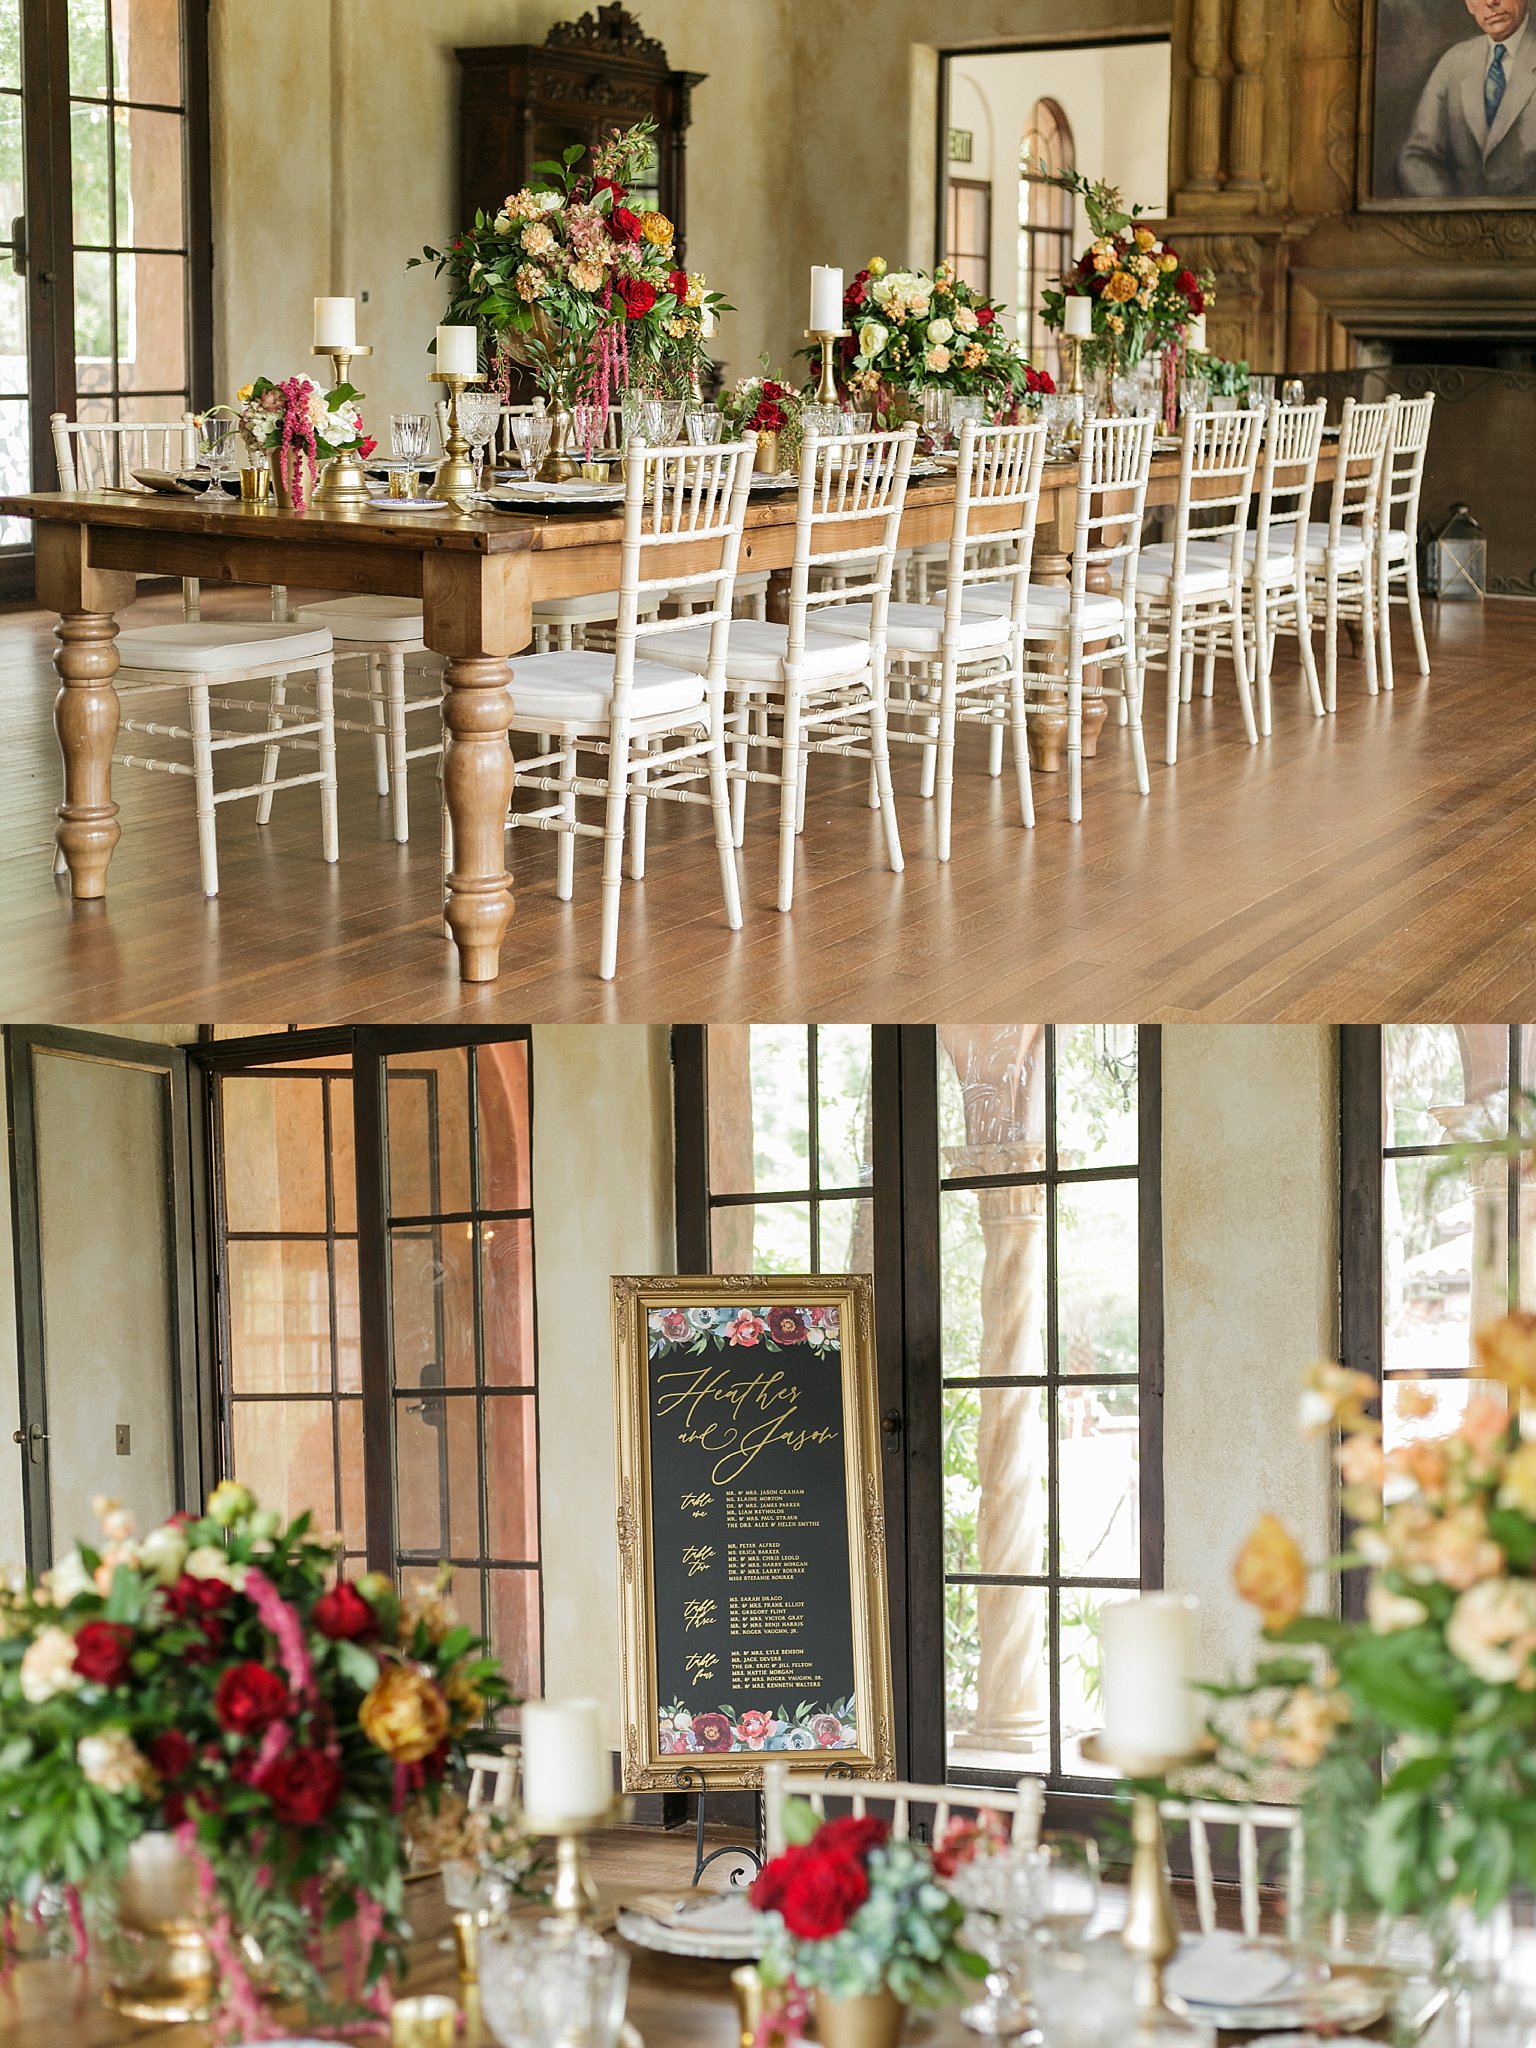 An intimate wedding reception setup of one long table.